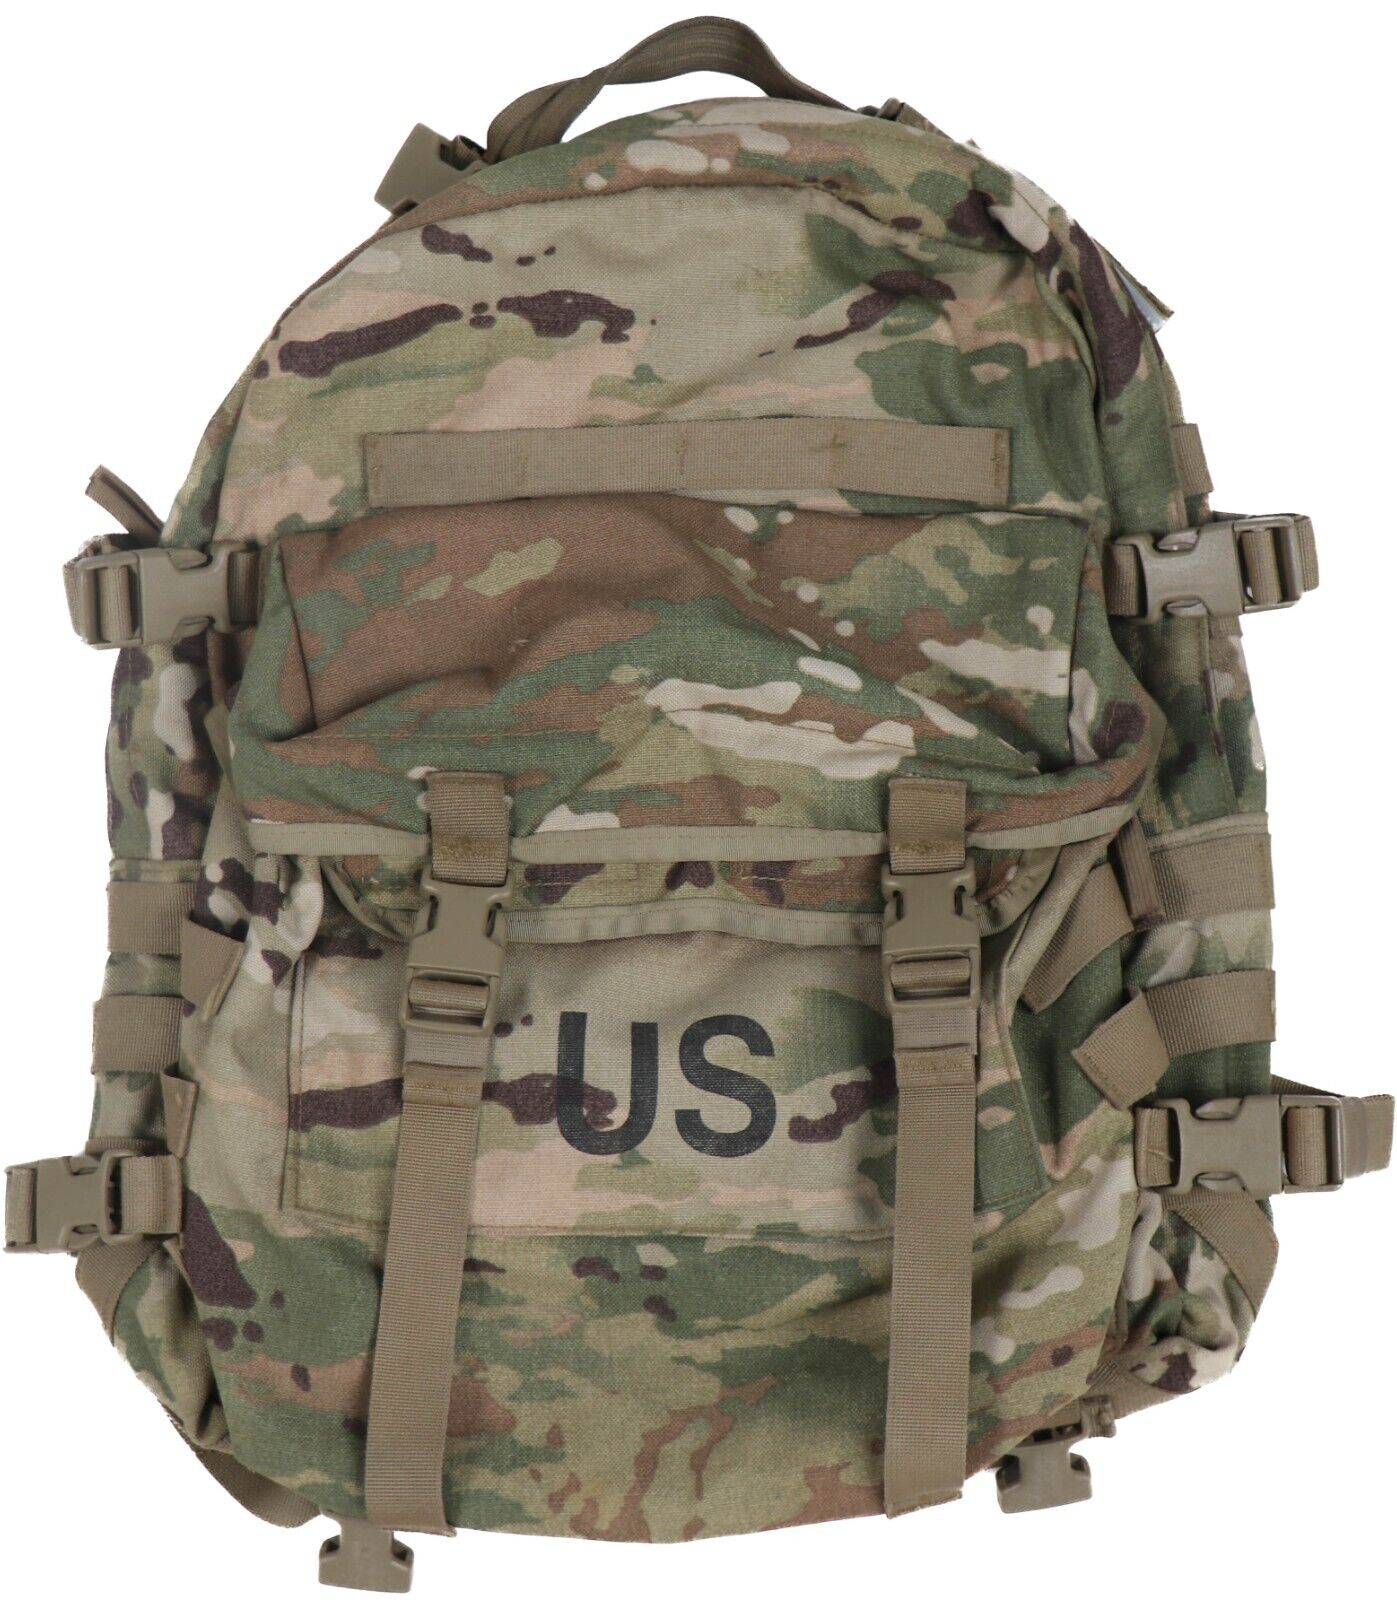 US Army OCP Multicam Molle II Patrol Assault Pack 3Day Backpack Field Bag Ruck